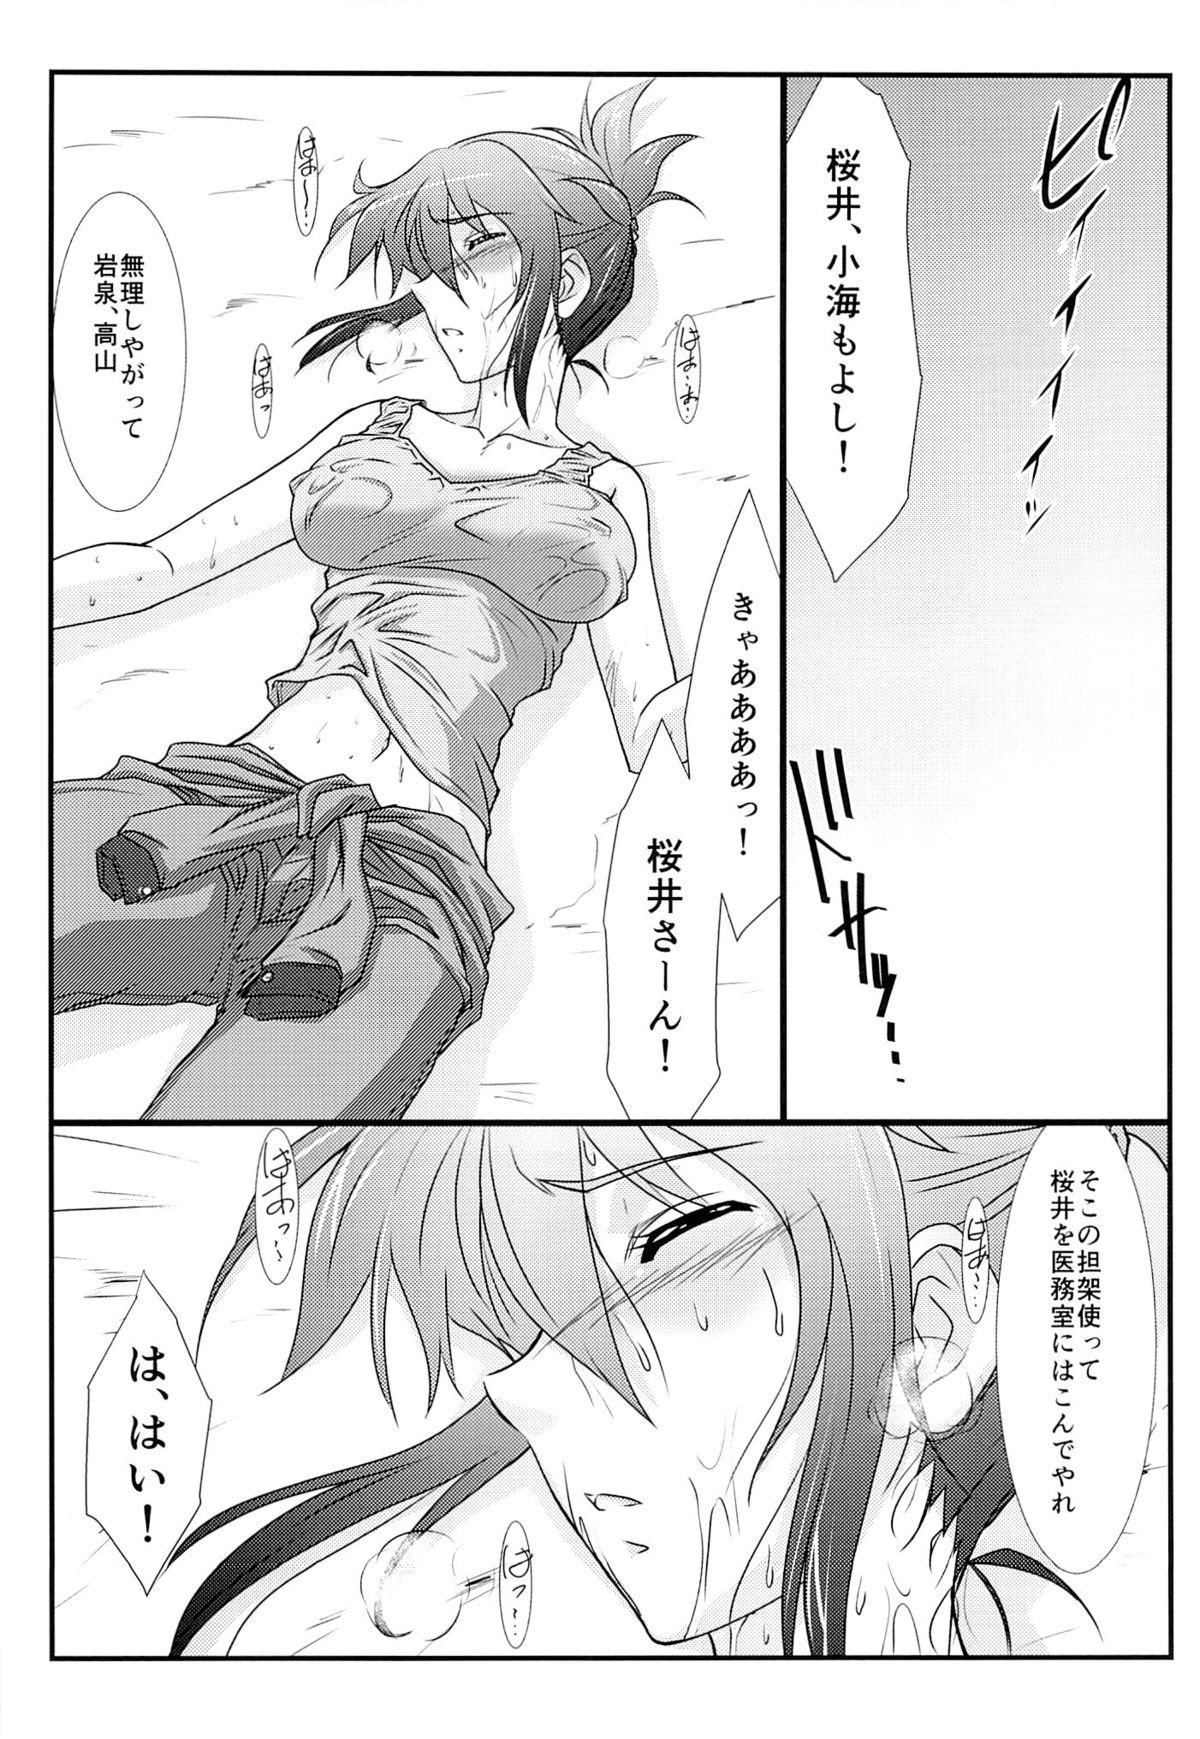 Neighbor Astral Bout Ver.28 - Rail wars Massage Creep - Page 4